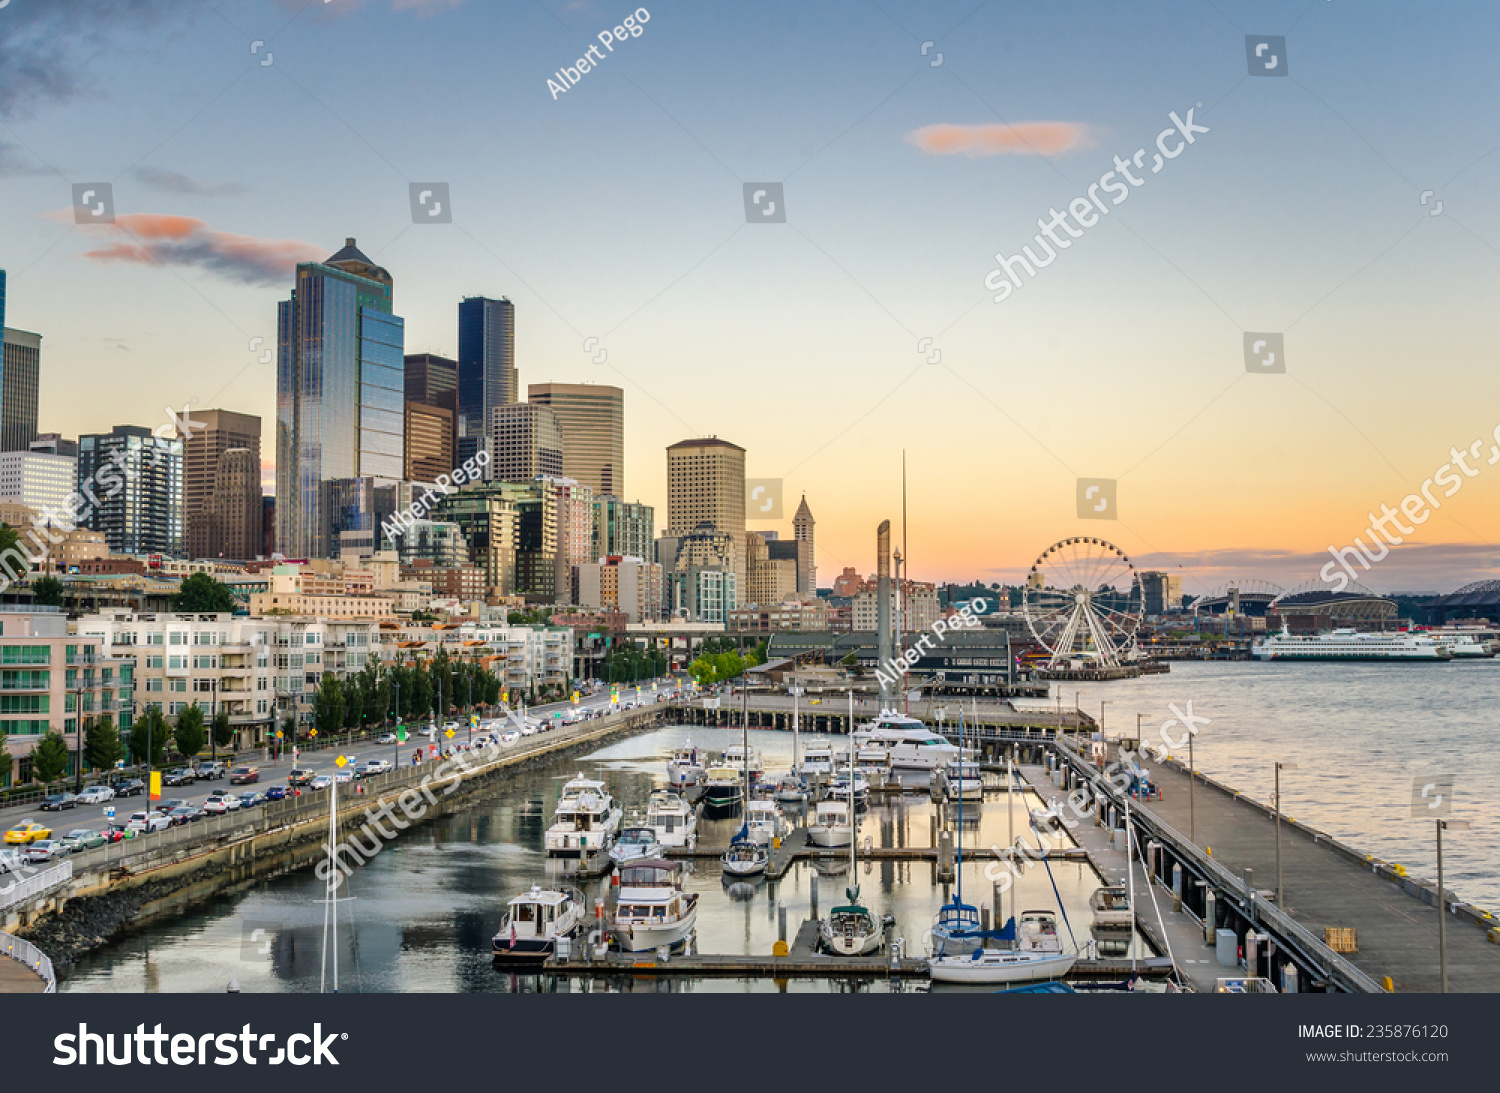 Sunset Over Downtown Seattle And Waterfront Stock Photo 235876120